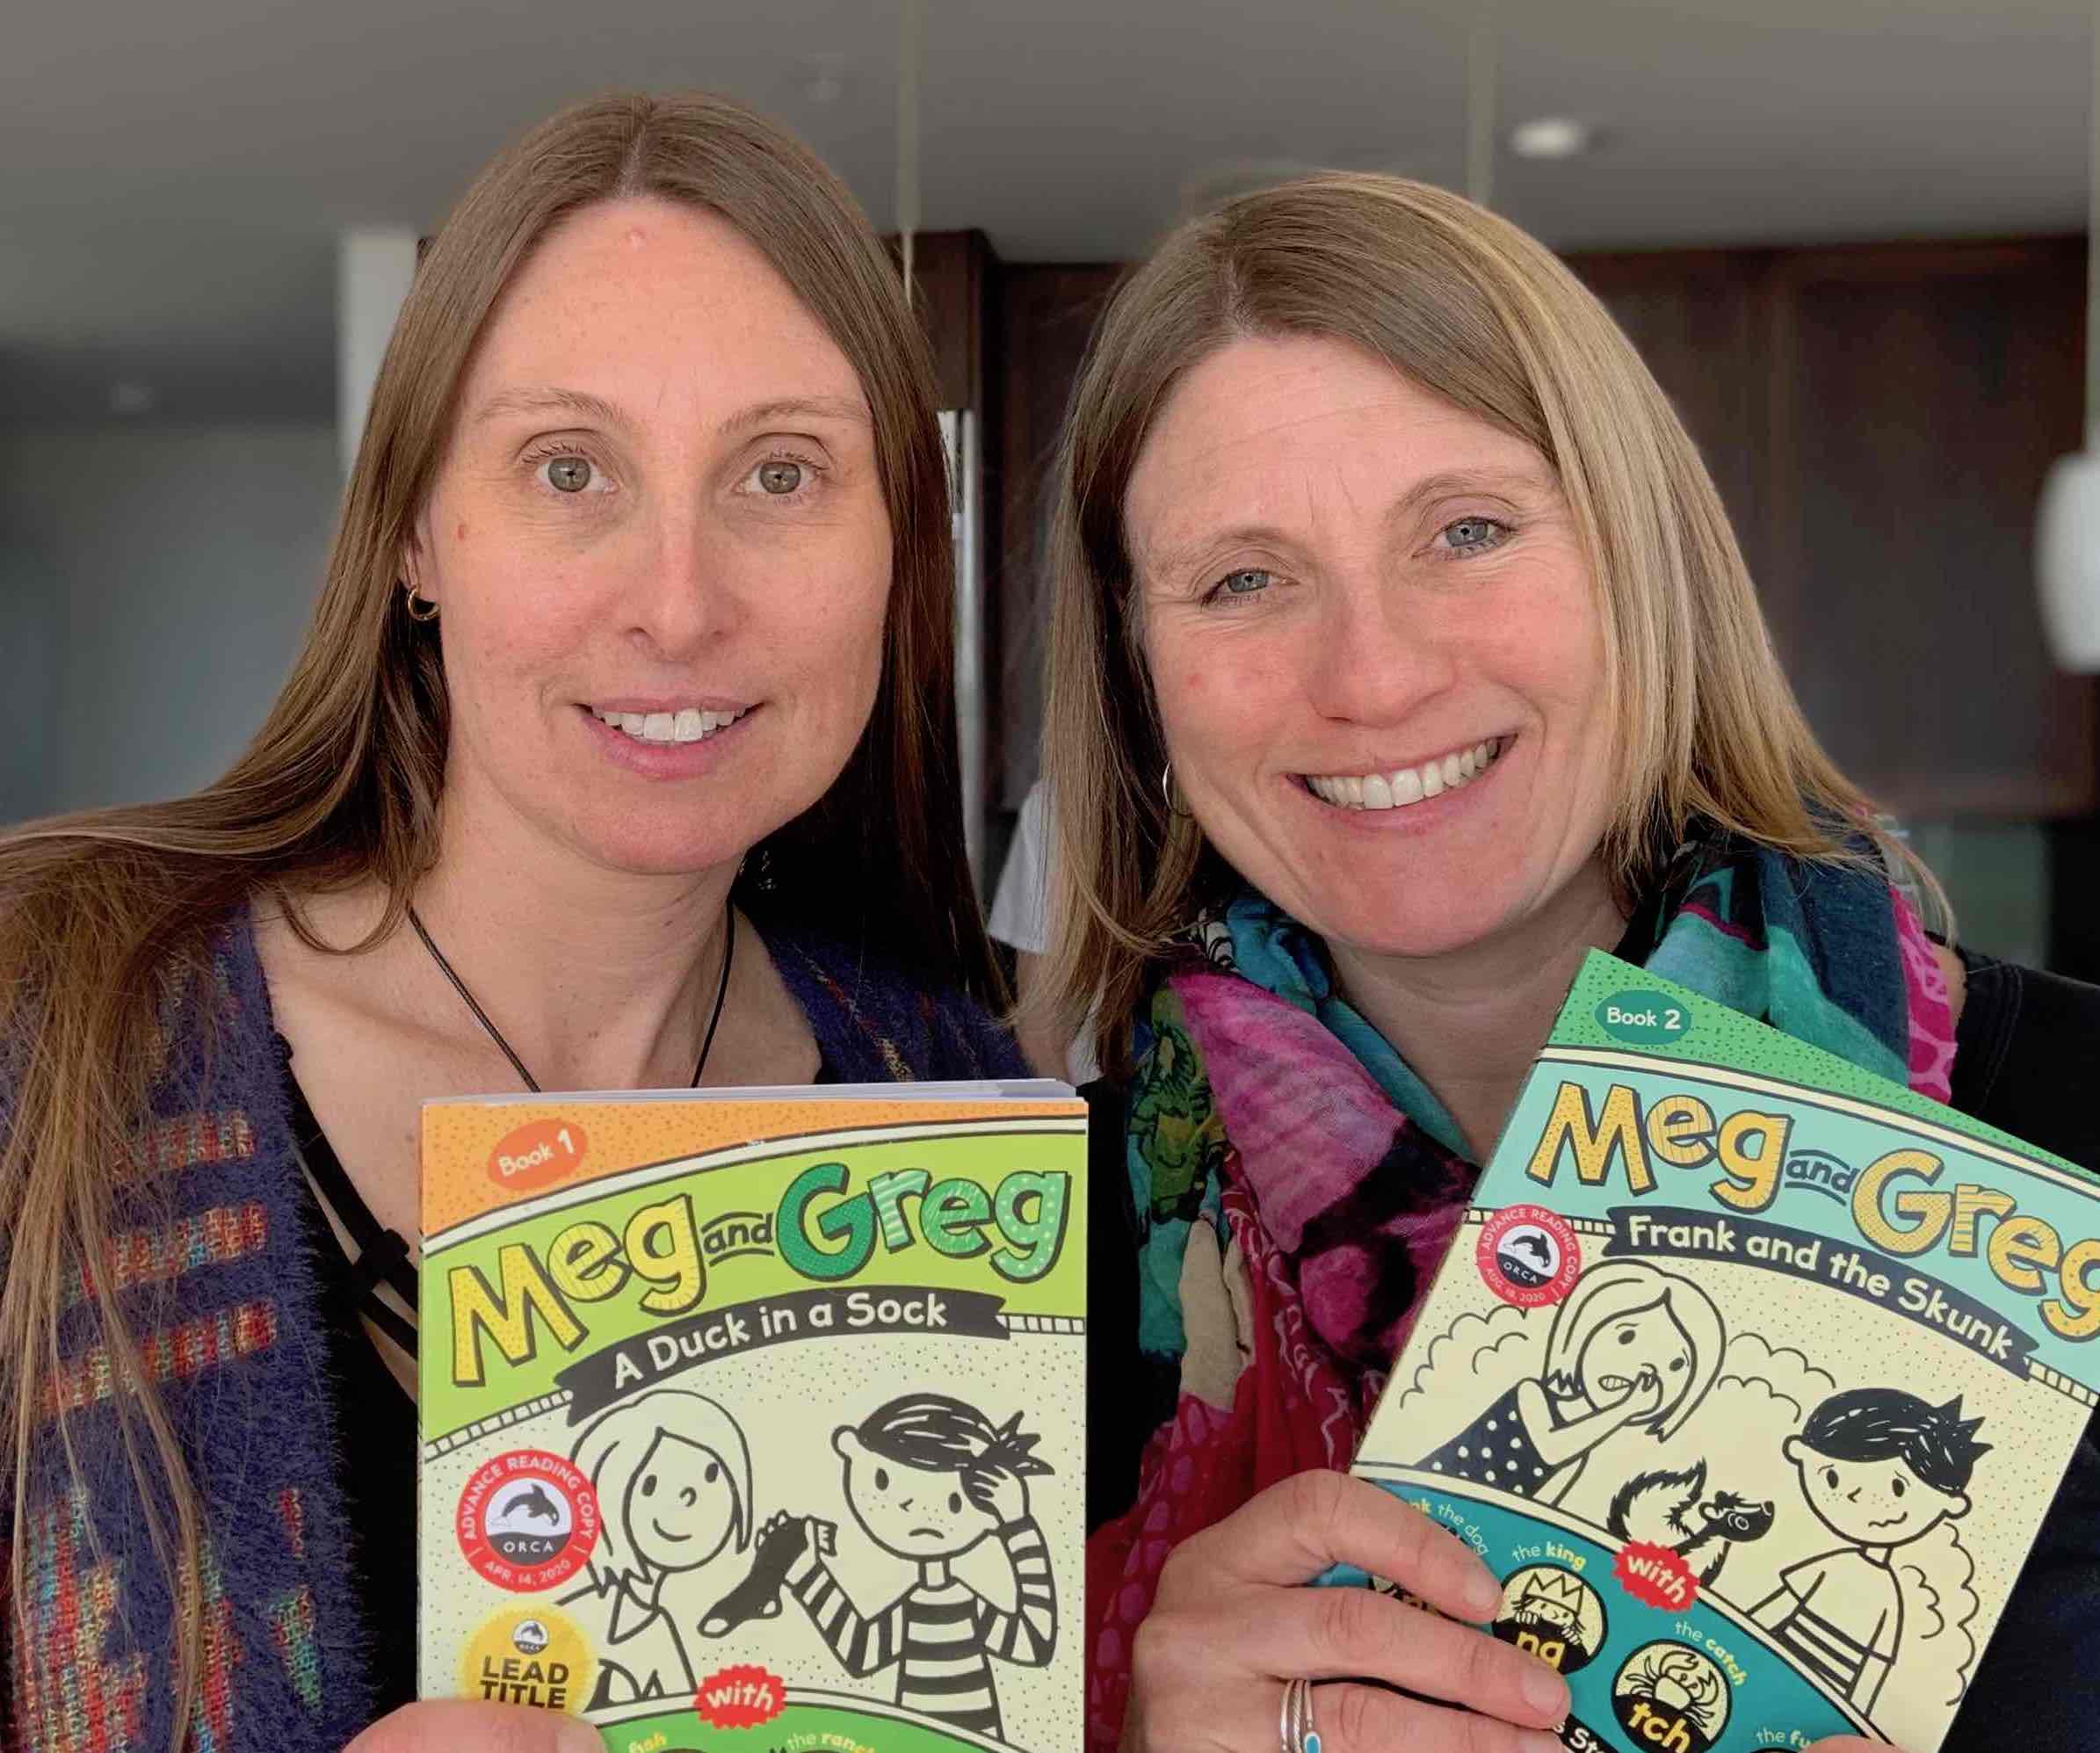 Rowena Rae and Elspeth Rae holding books from the Meg and Greg series